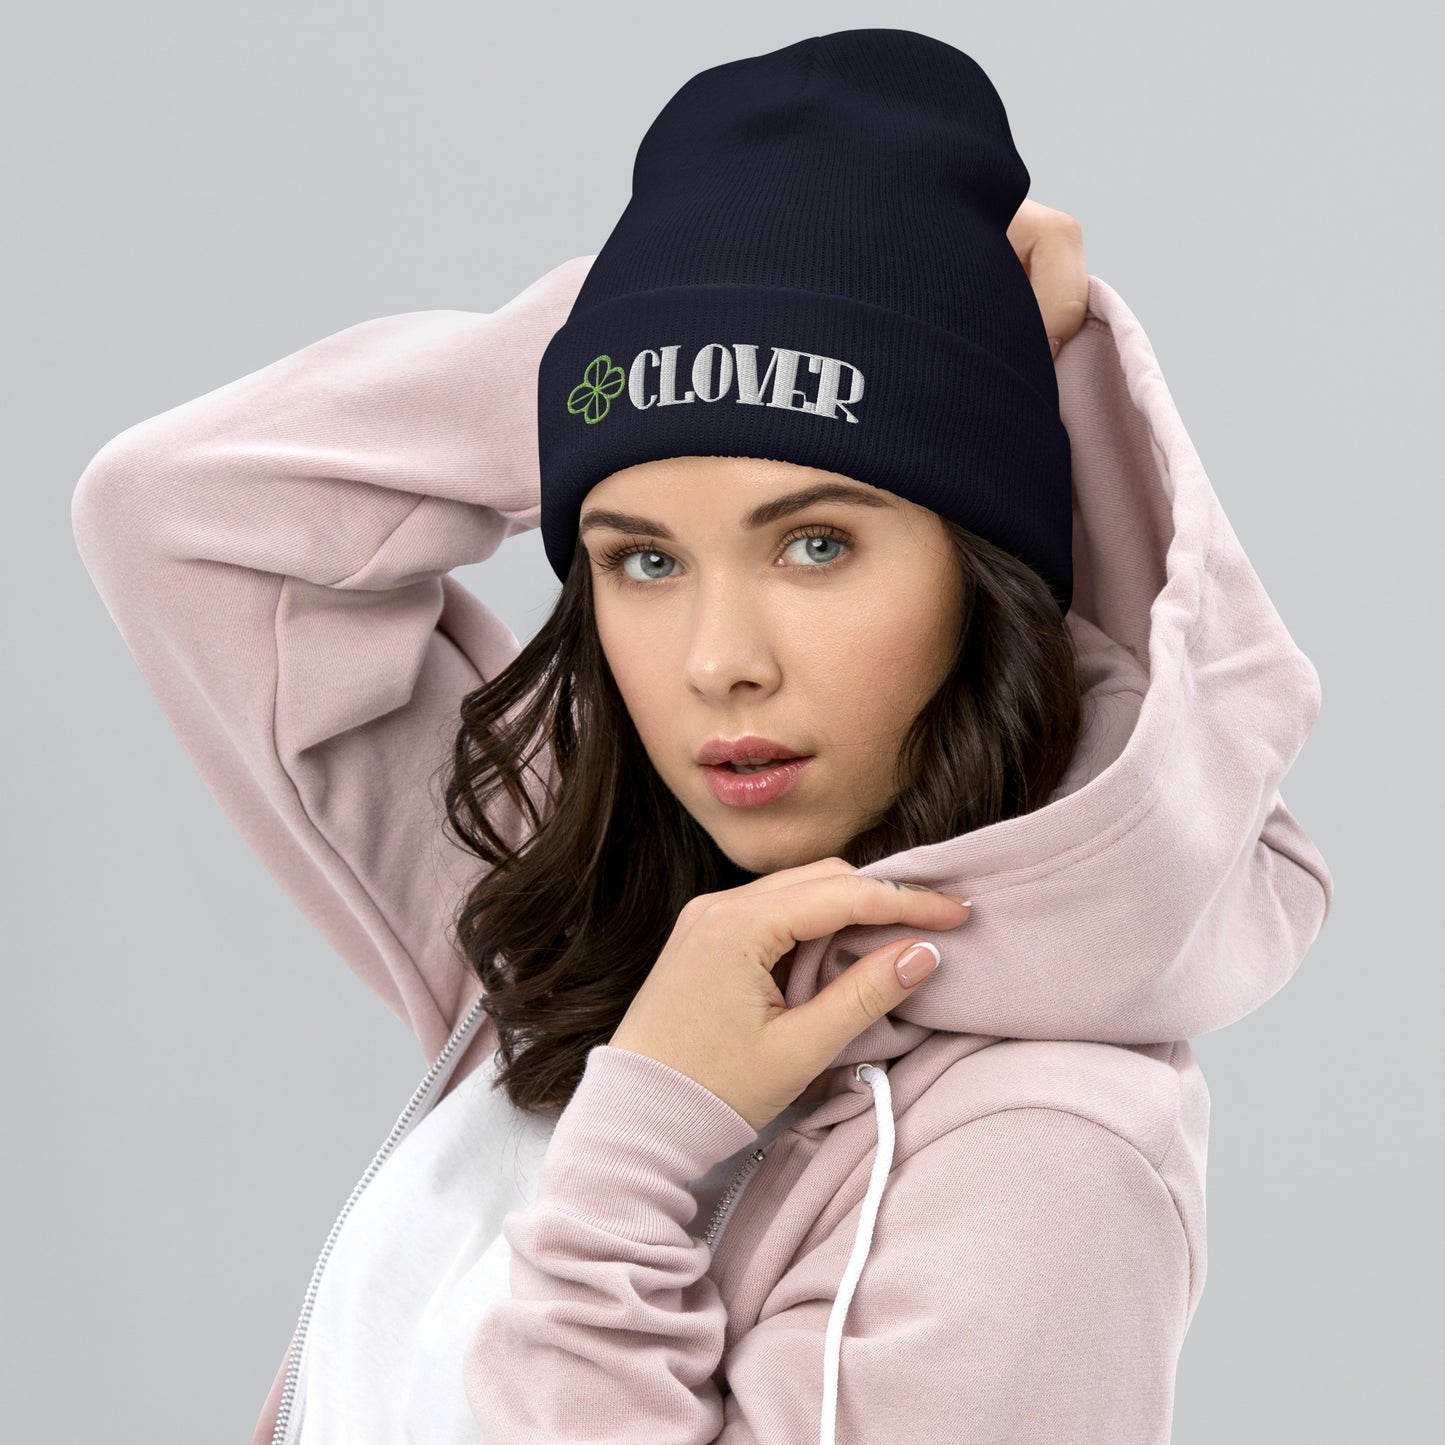 Clover - Embroidered Cuffed Beanie